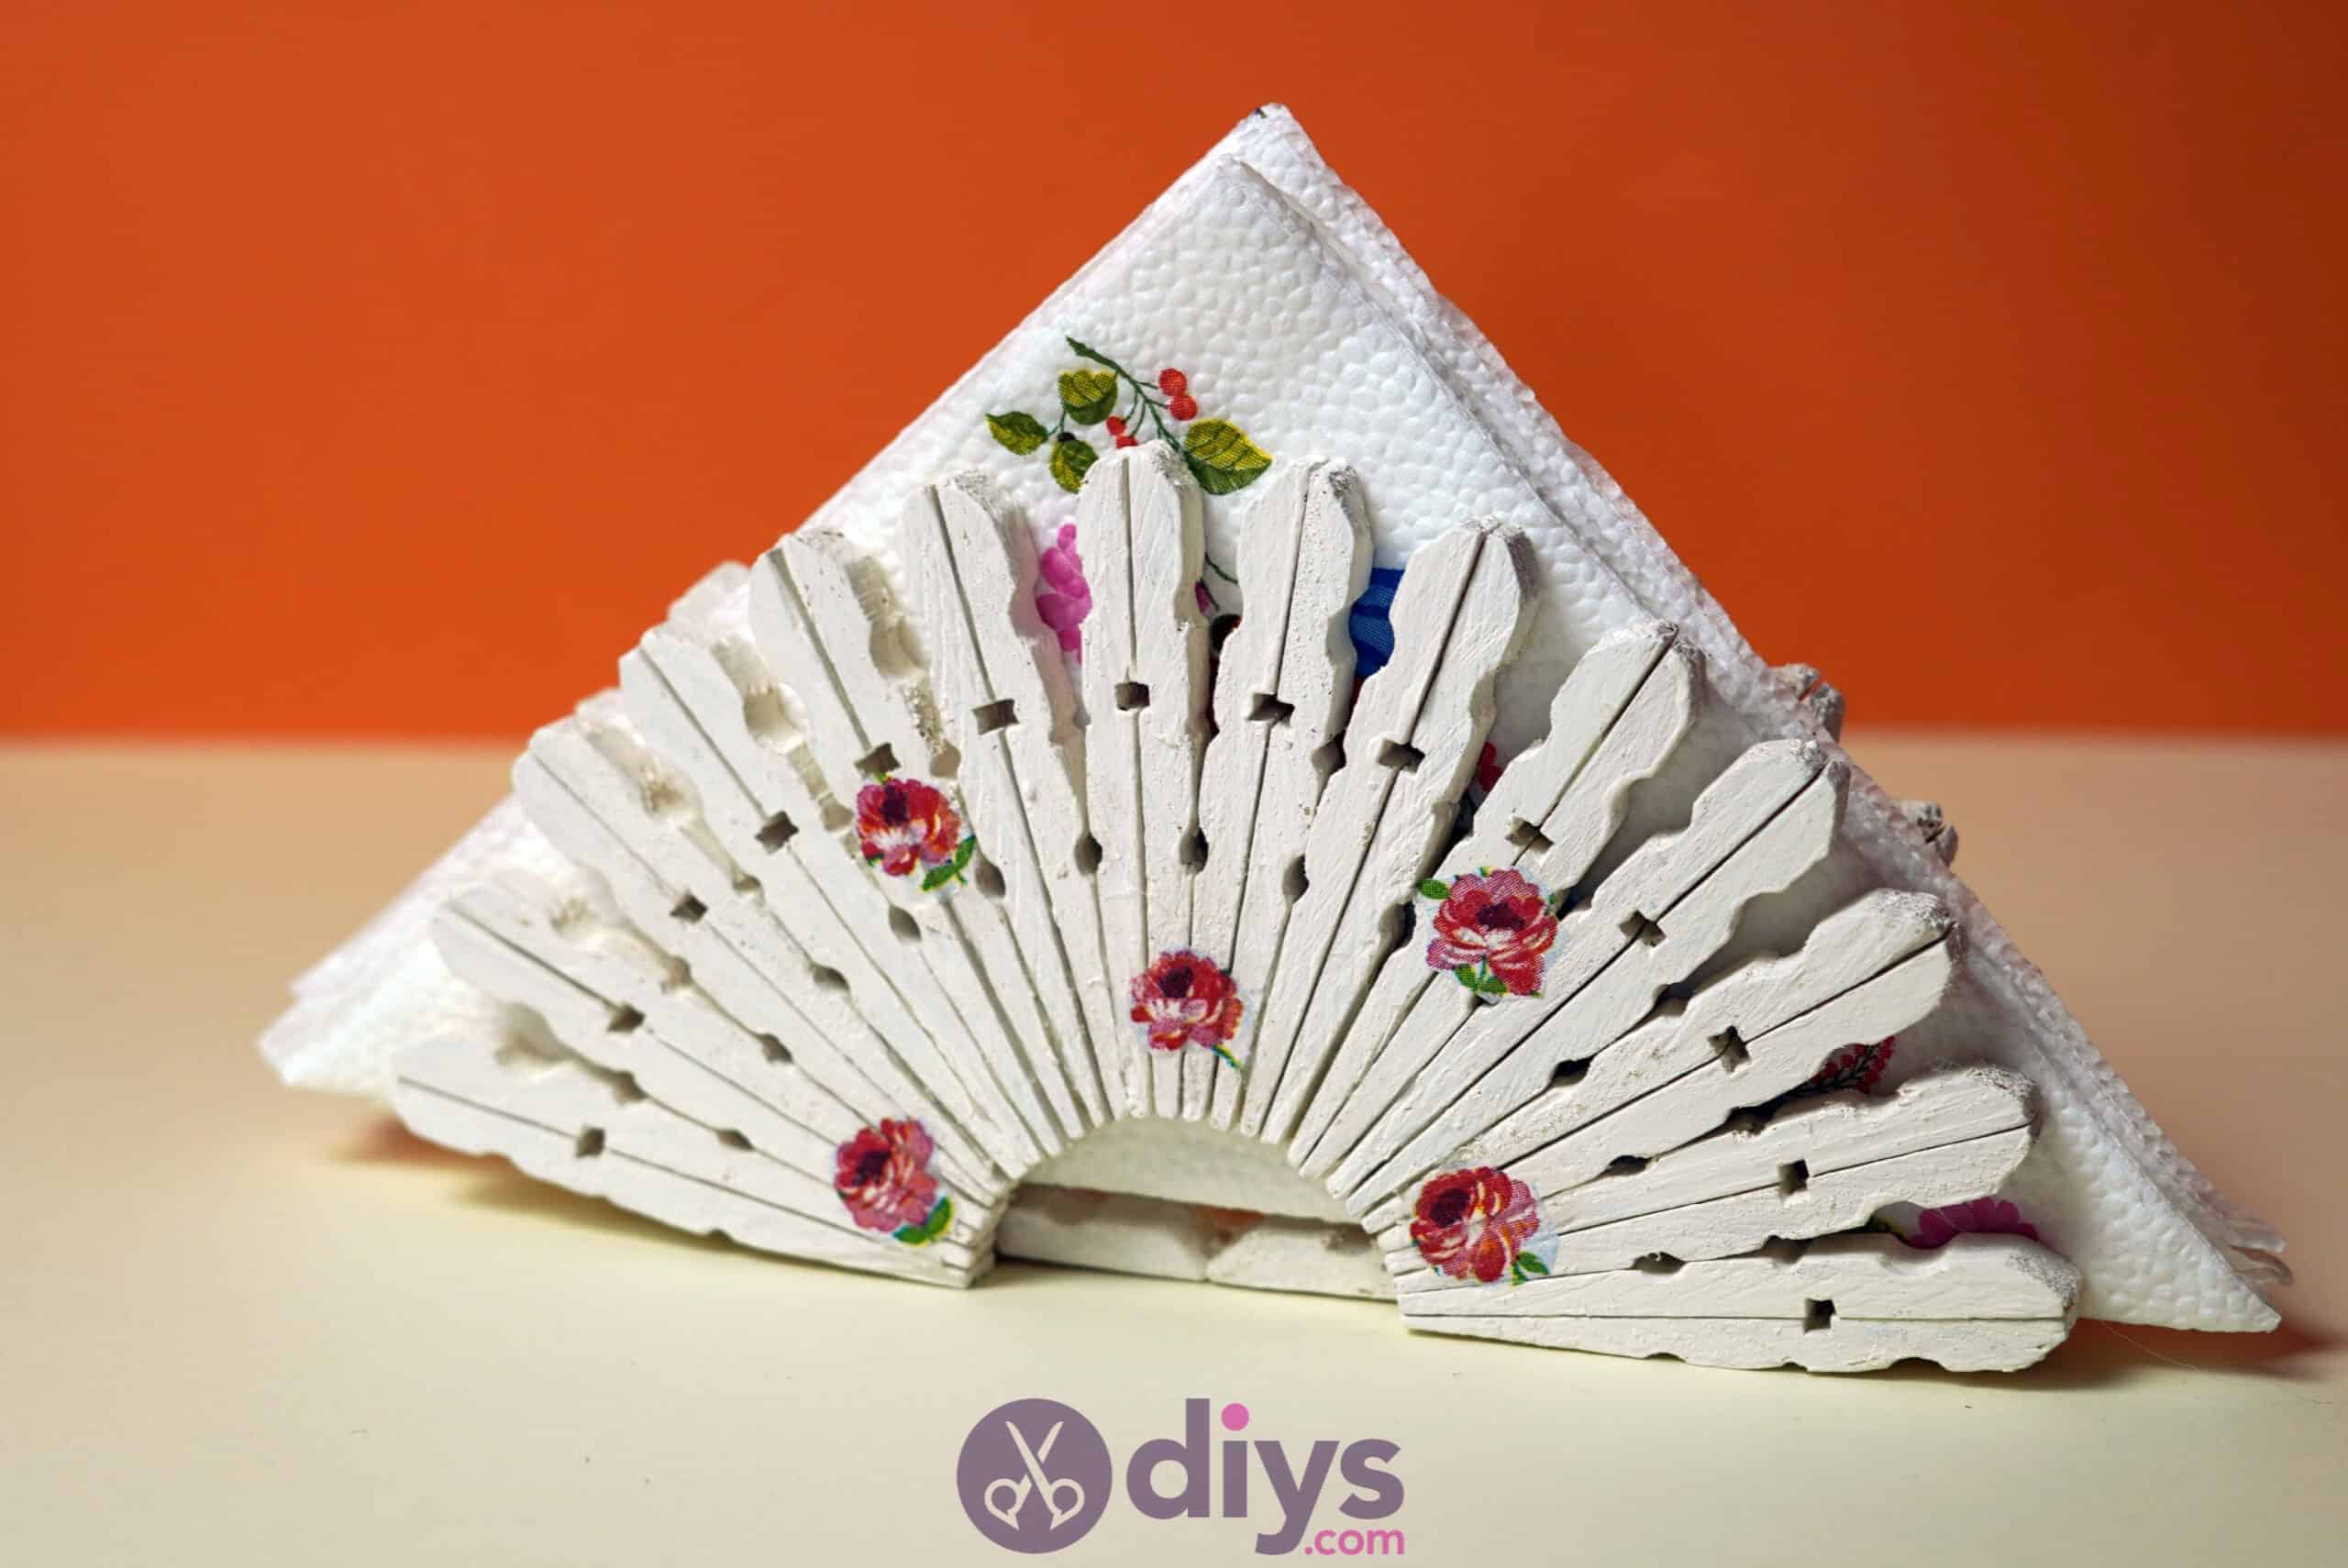 Diy clothespin napkin holder project